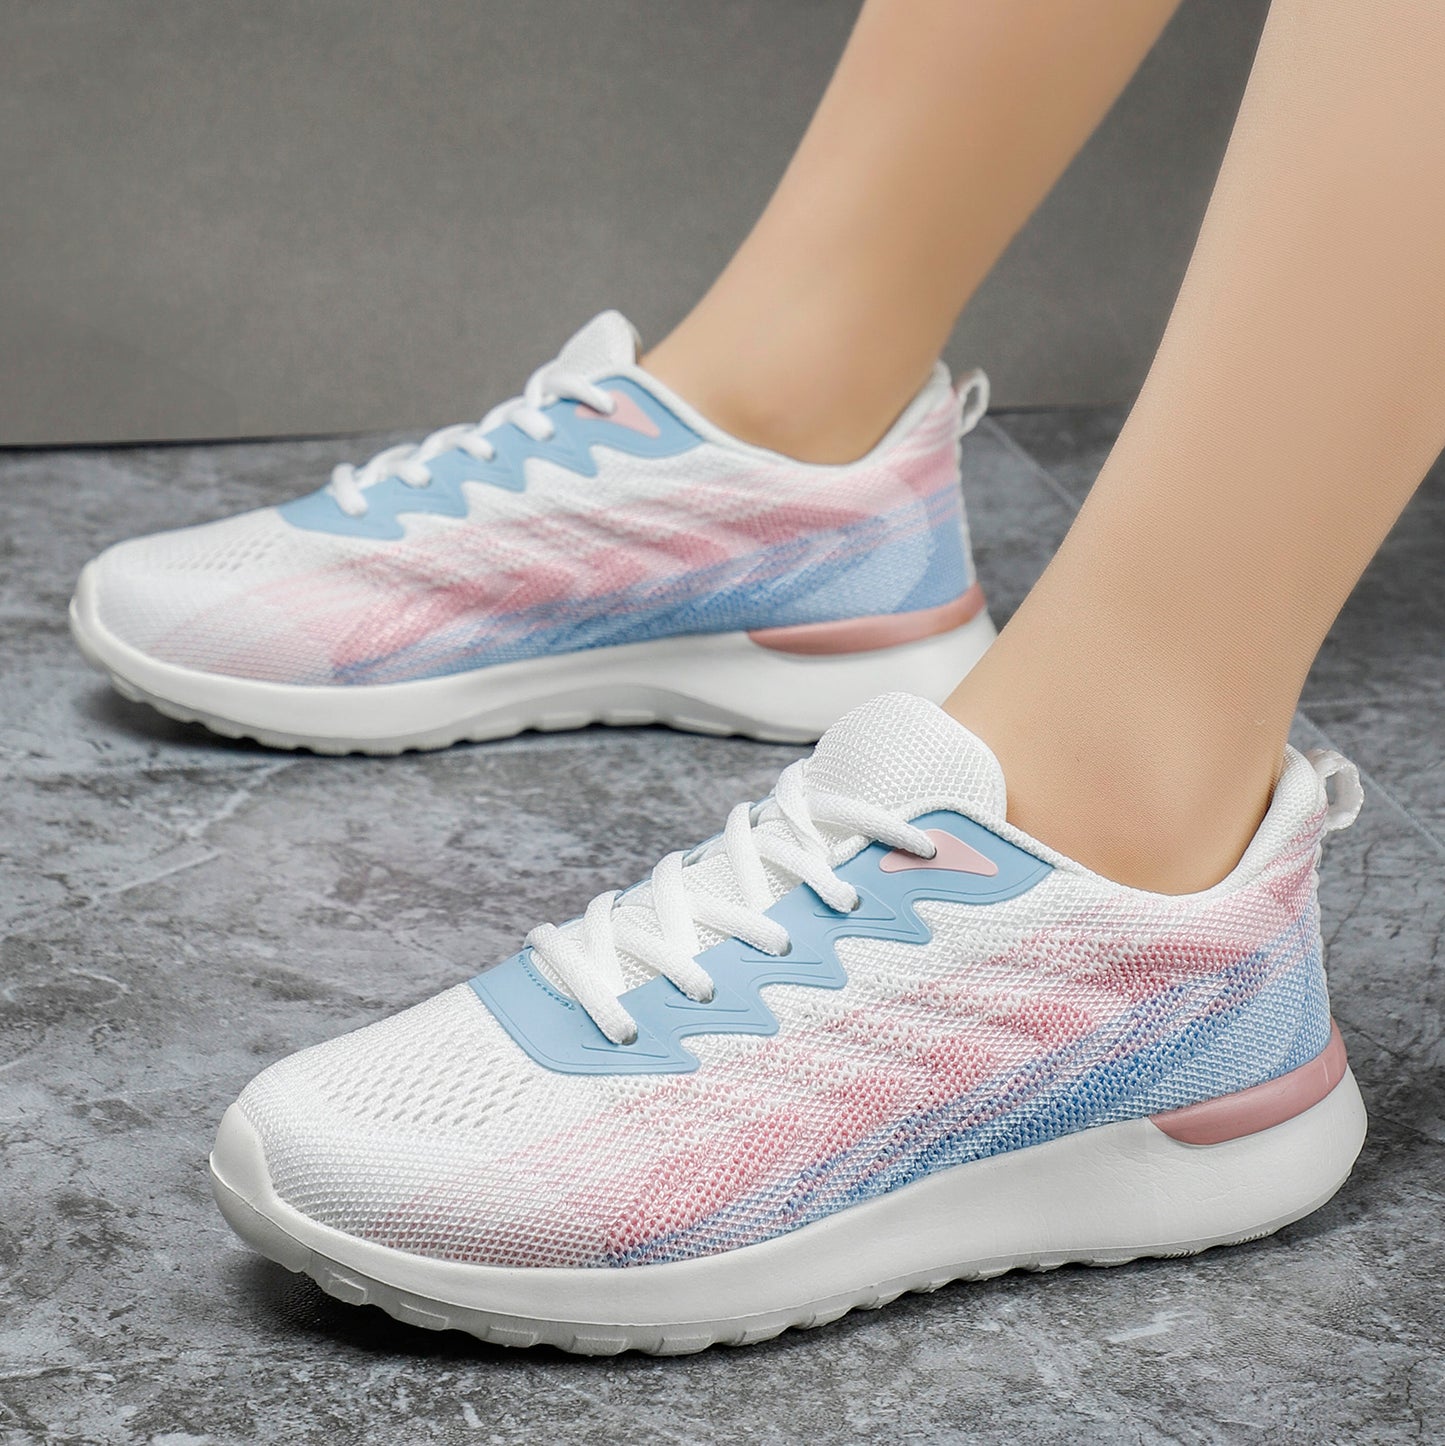 Casual sneakers with stylish patterns and colors for women